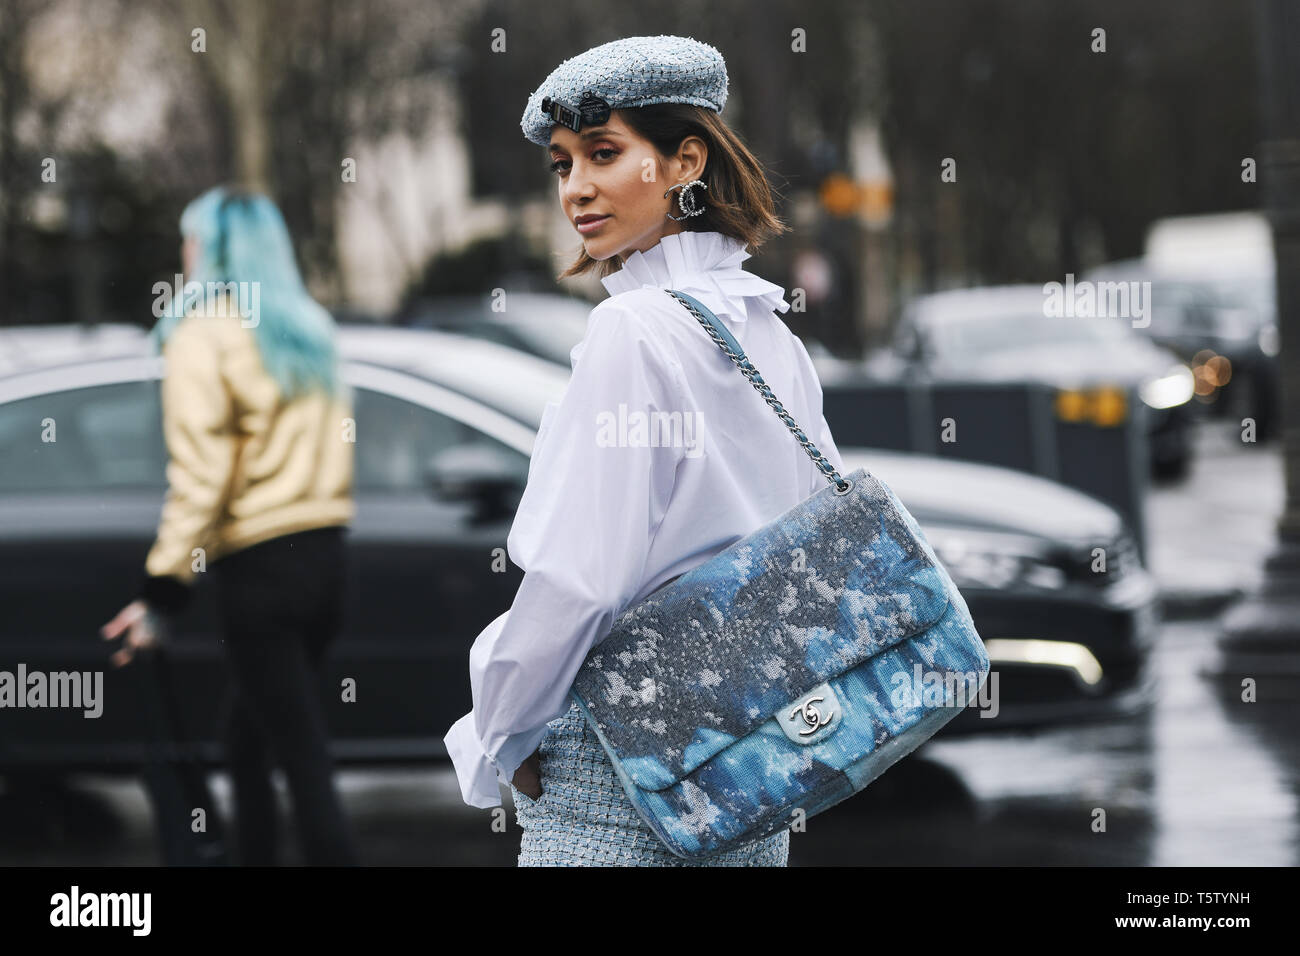 Paris, France - March 5, 2019: Street style outfit - Solange Smith